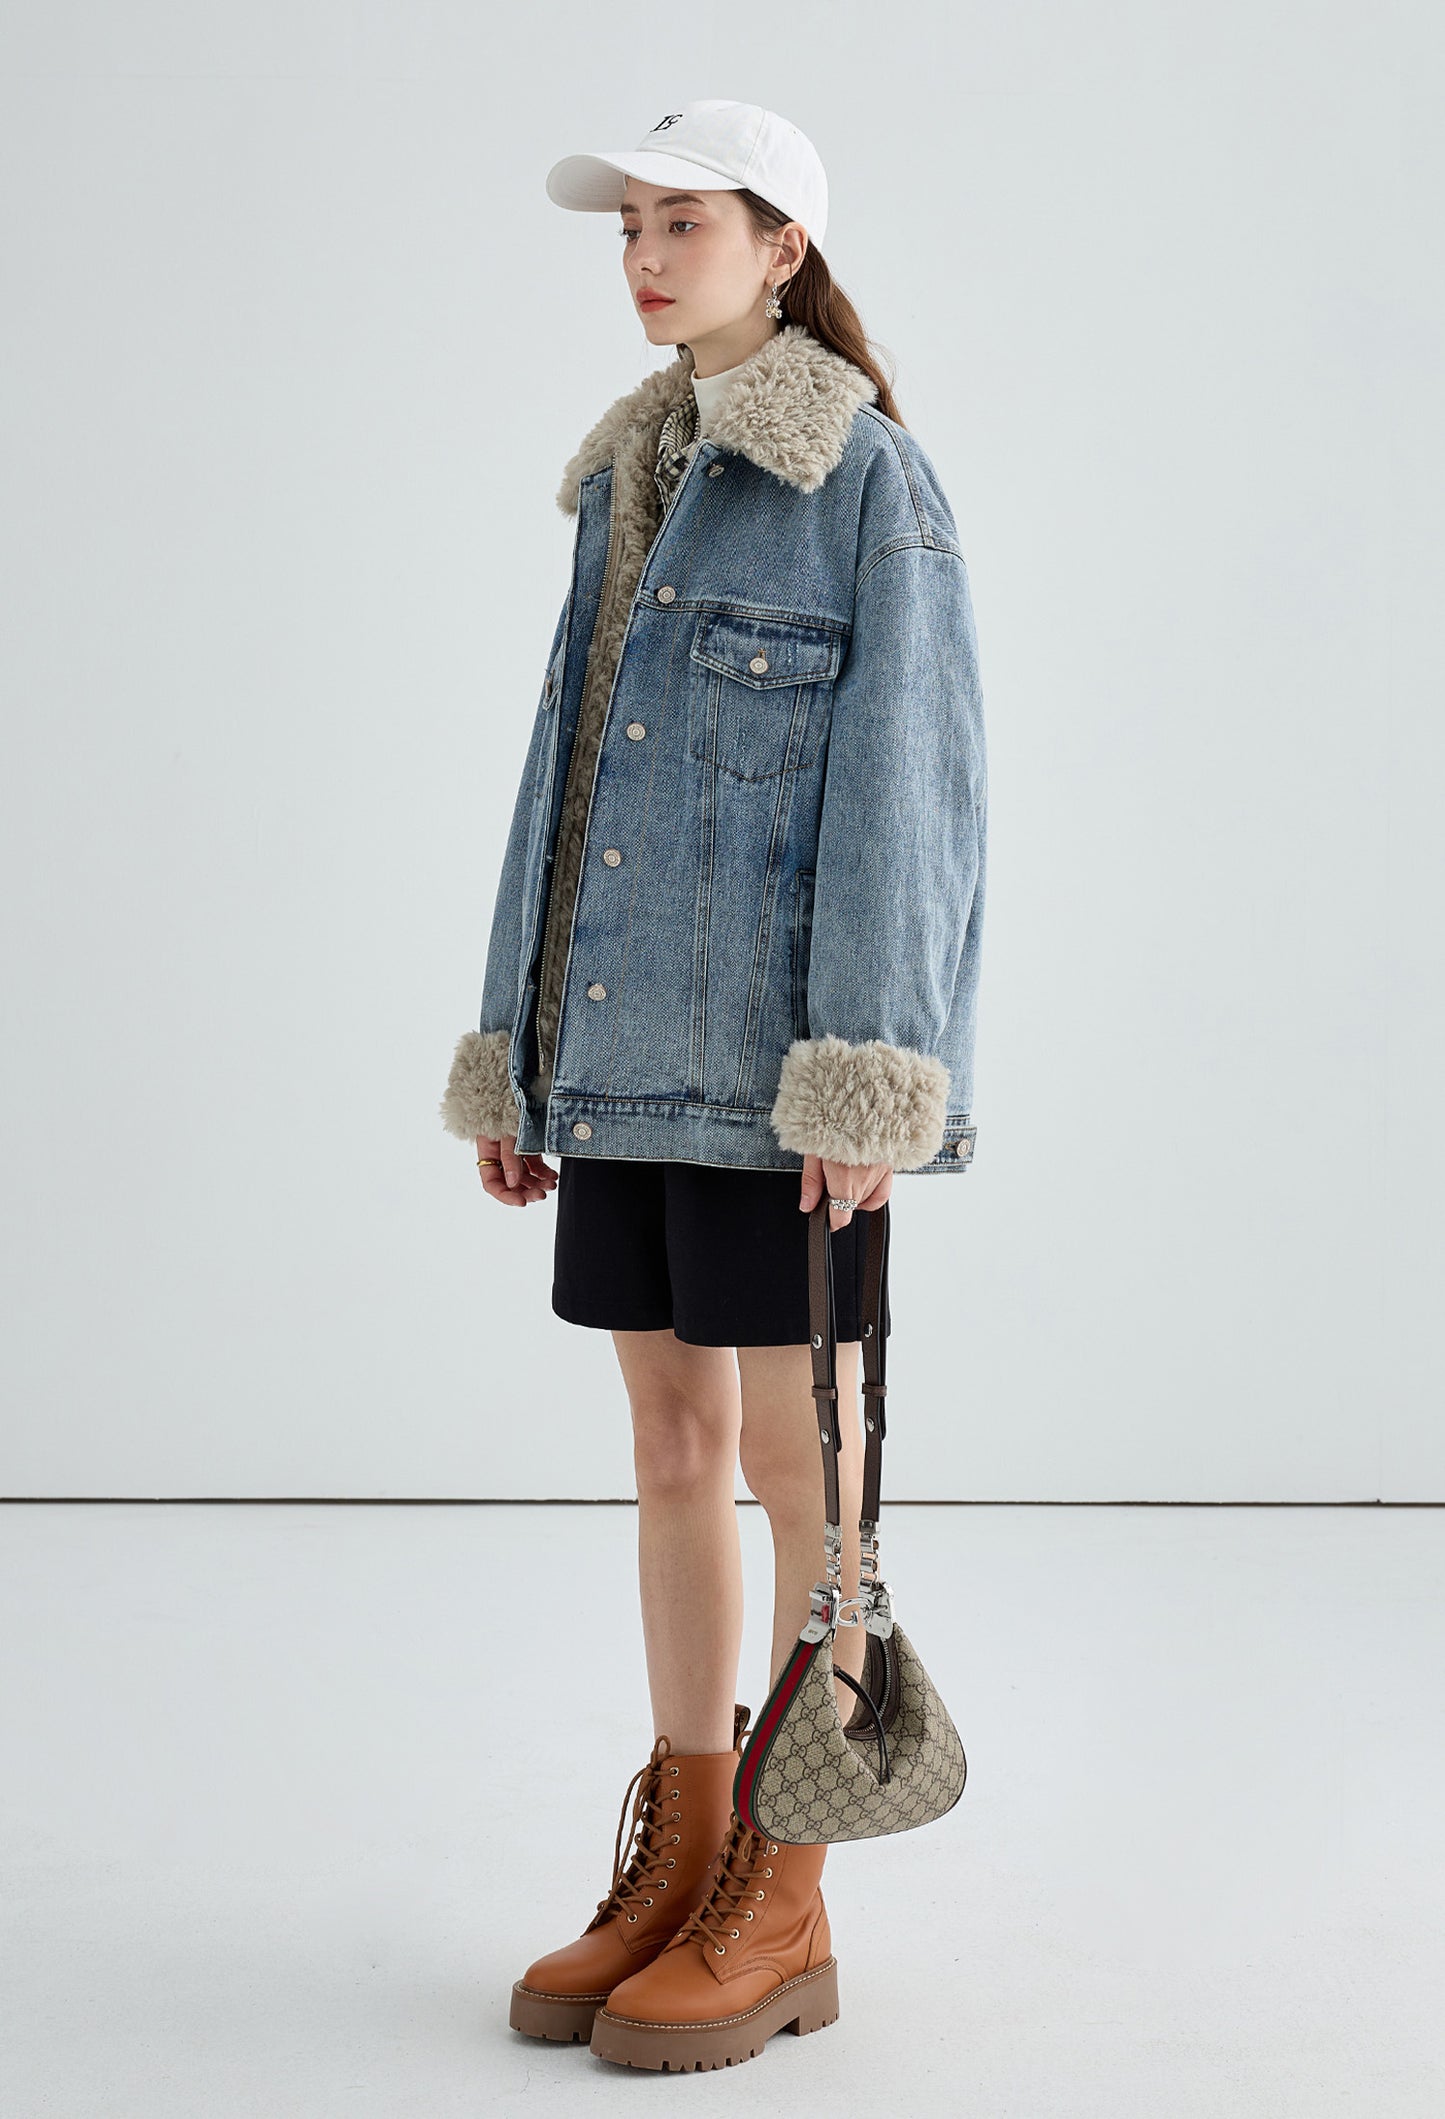 boa-liner-denim-jacket,simple,cool,cute,sexy,mode